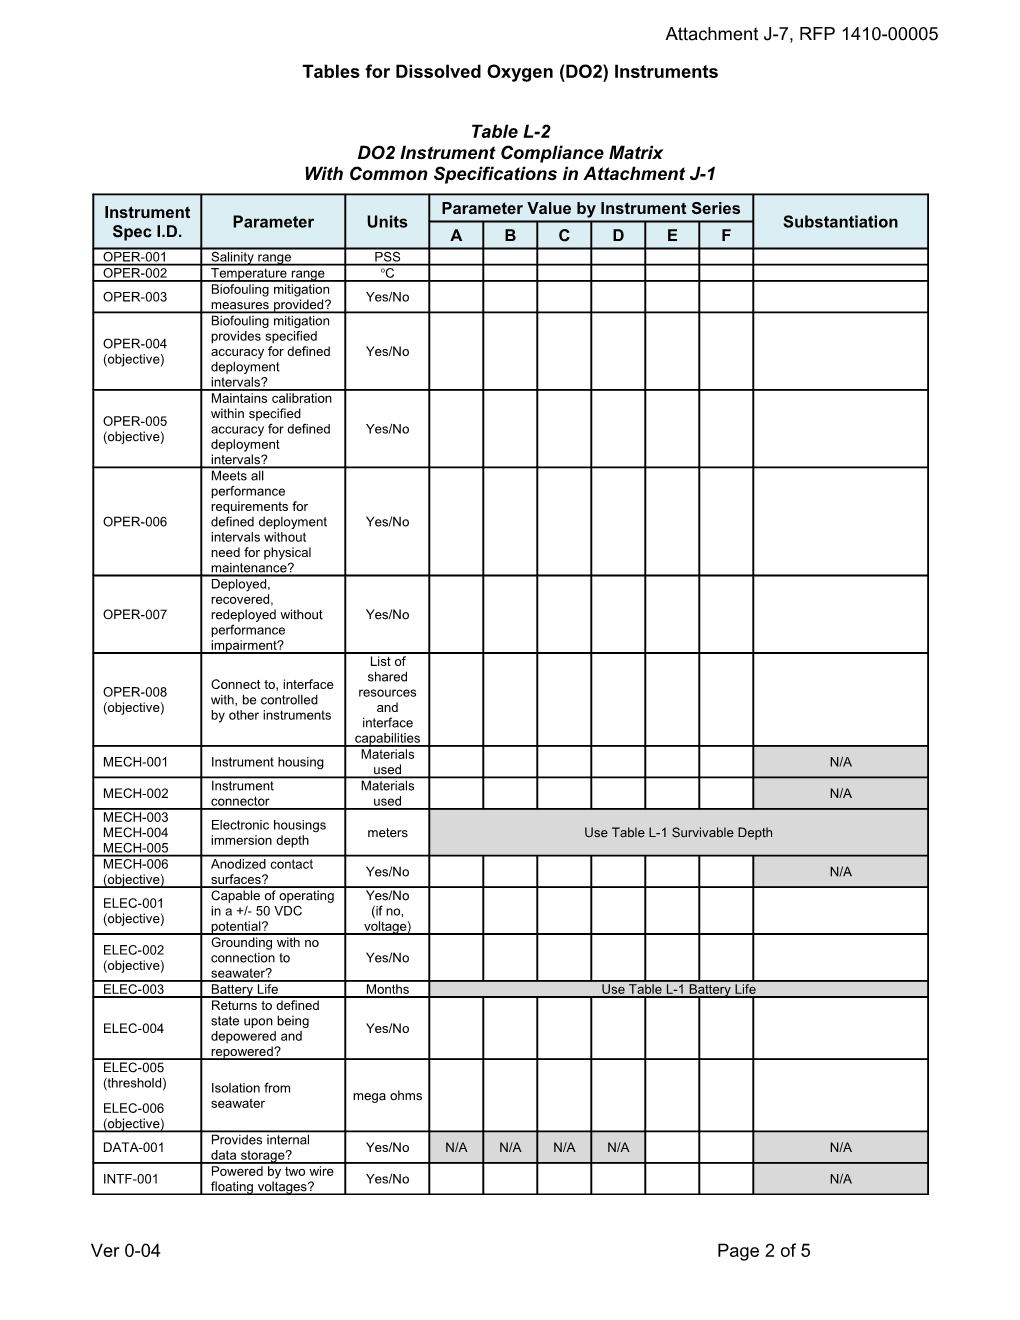 Tables for Dissolved Oxygen (DO2) Instruments